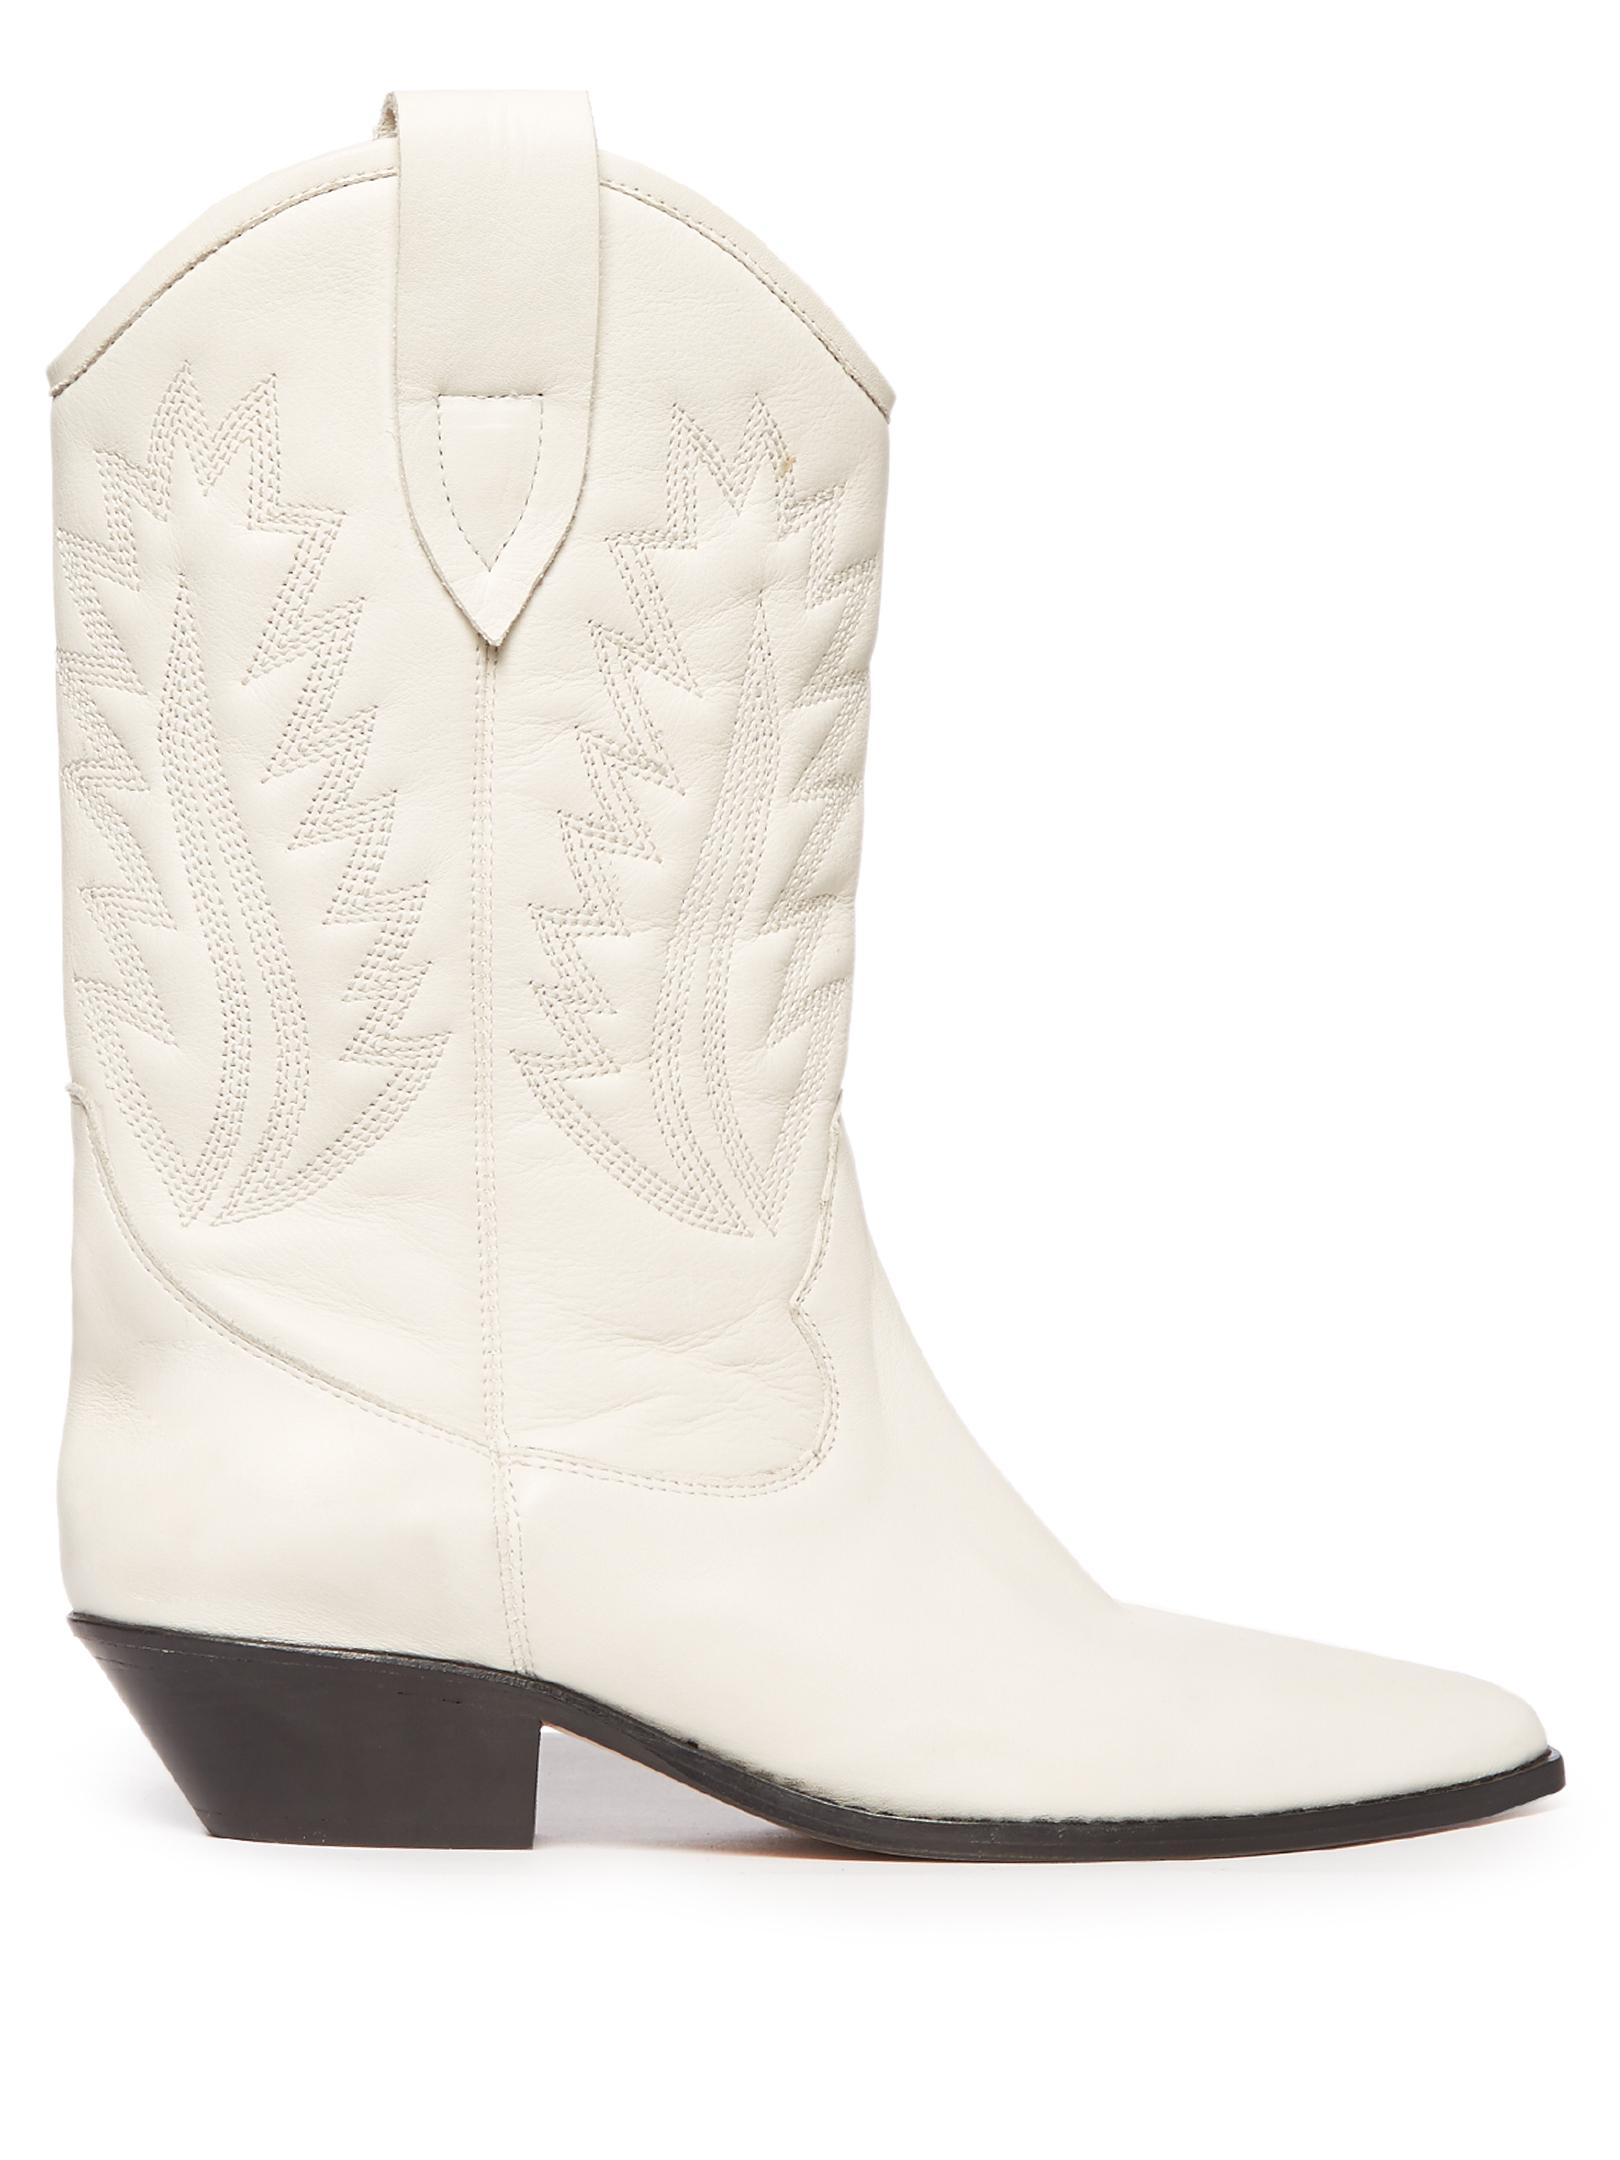 Isabel Marant Étoile Leather Western in White - Lyst